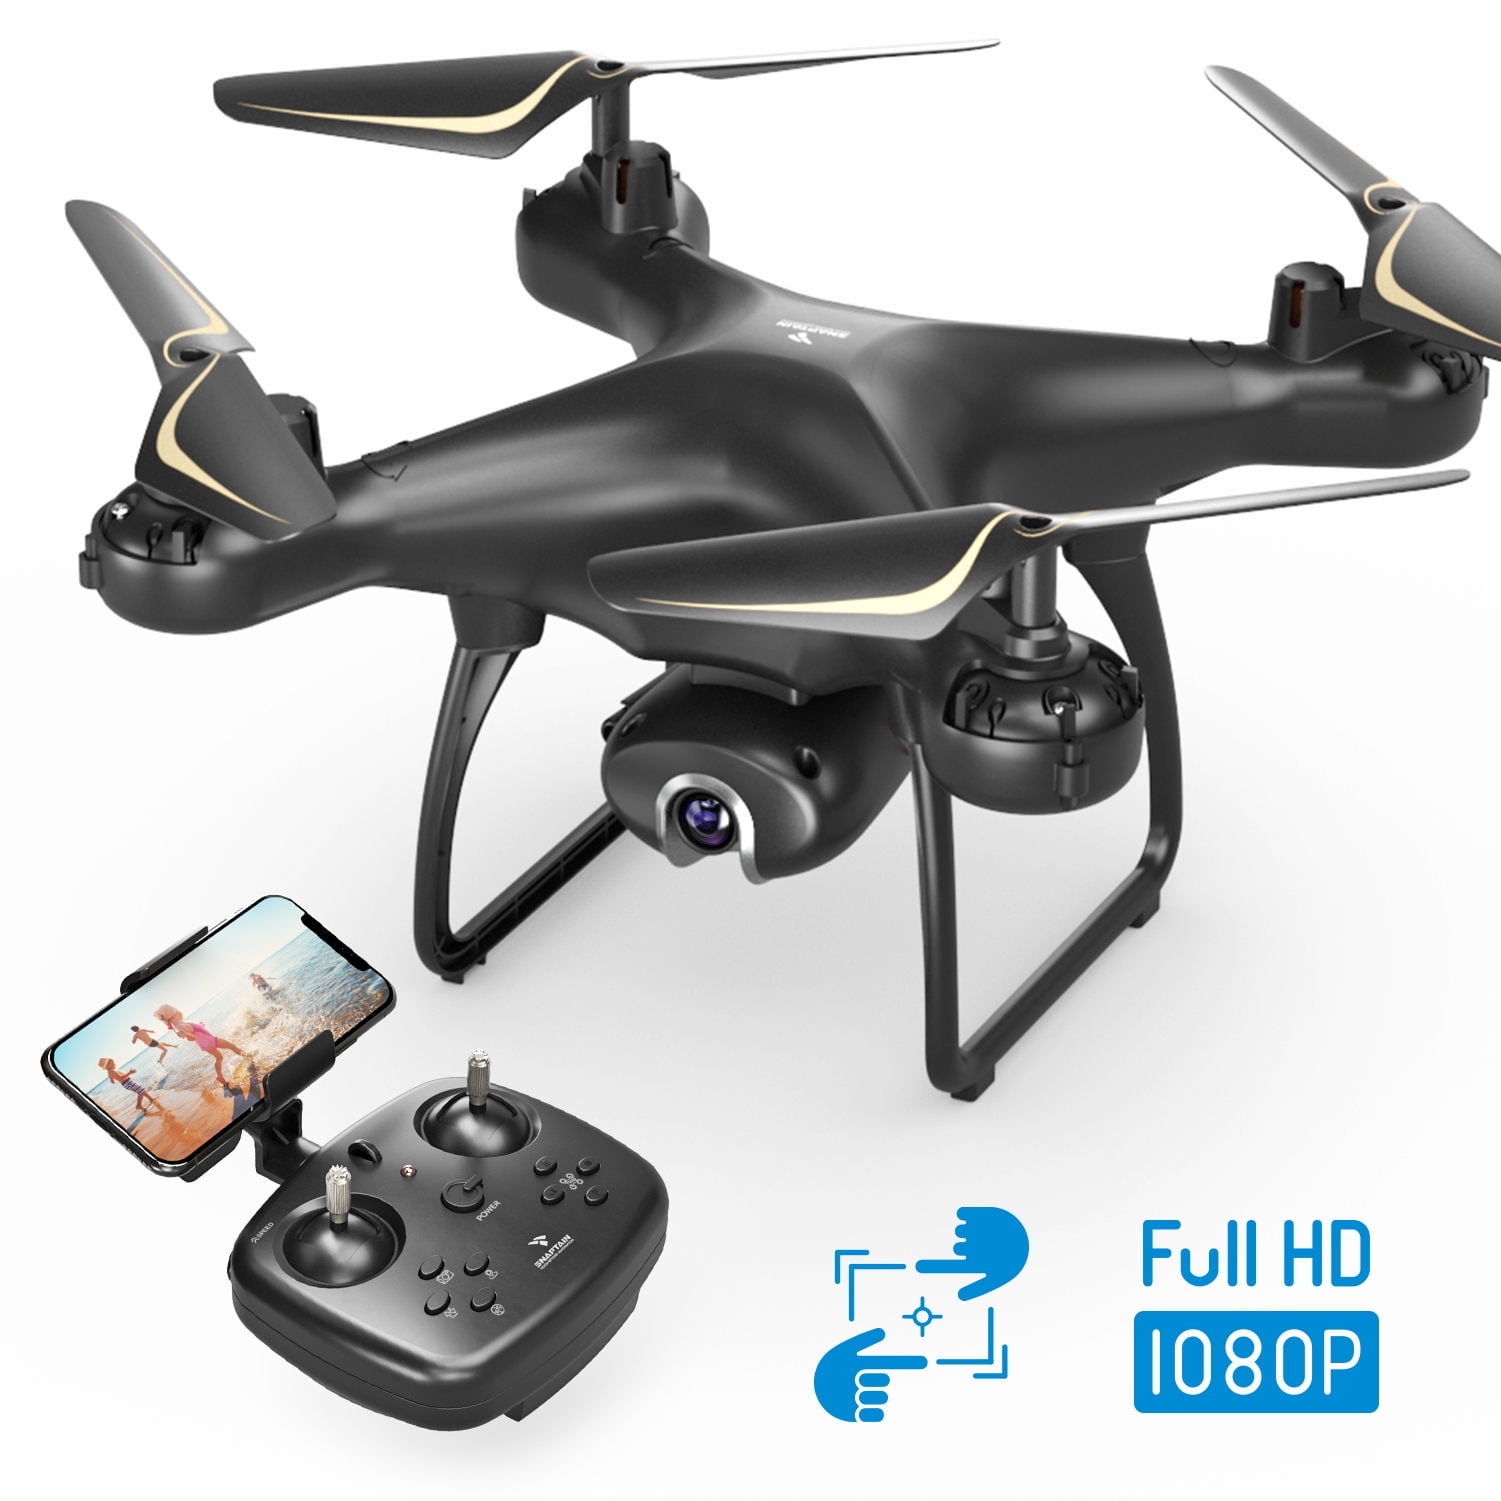 Snaptain Drone SP650 Wifi FPV Drone with 1080P HD Camera, Video Drone with  Gesture Control, RC Quadcopter for Beginners, Black